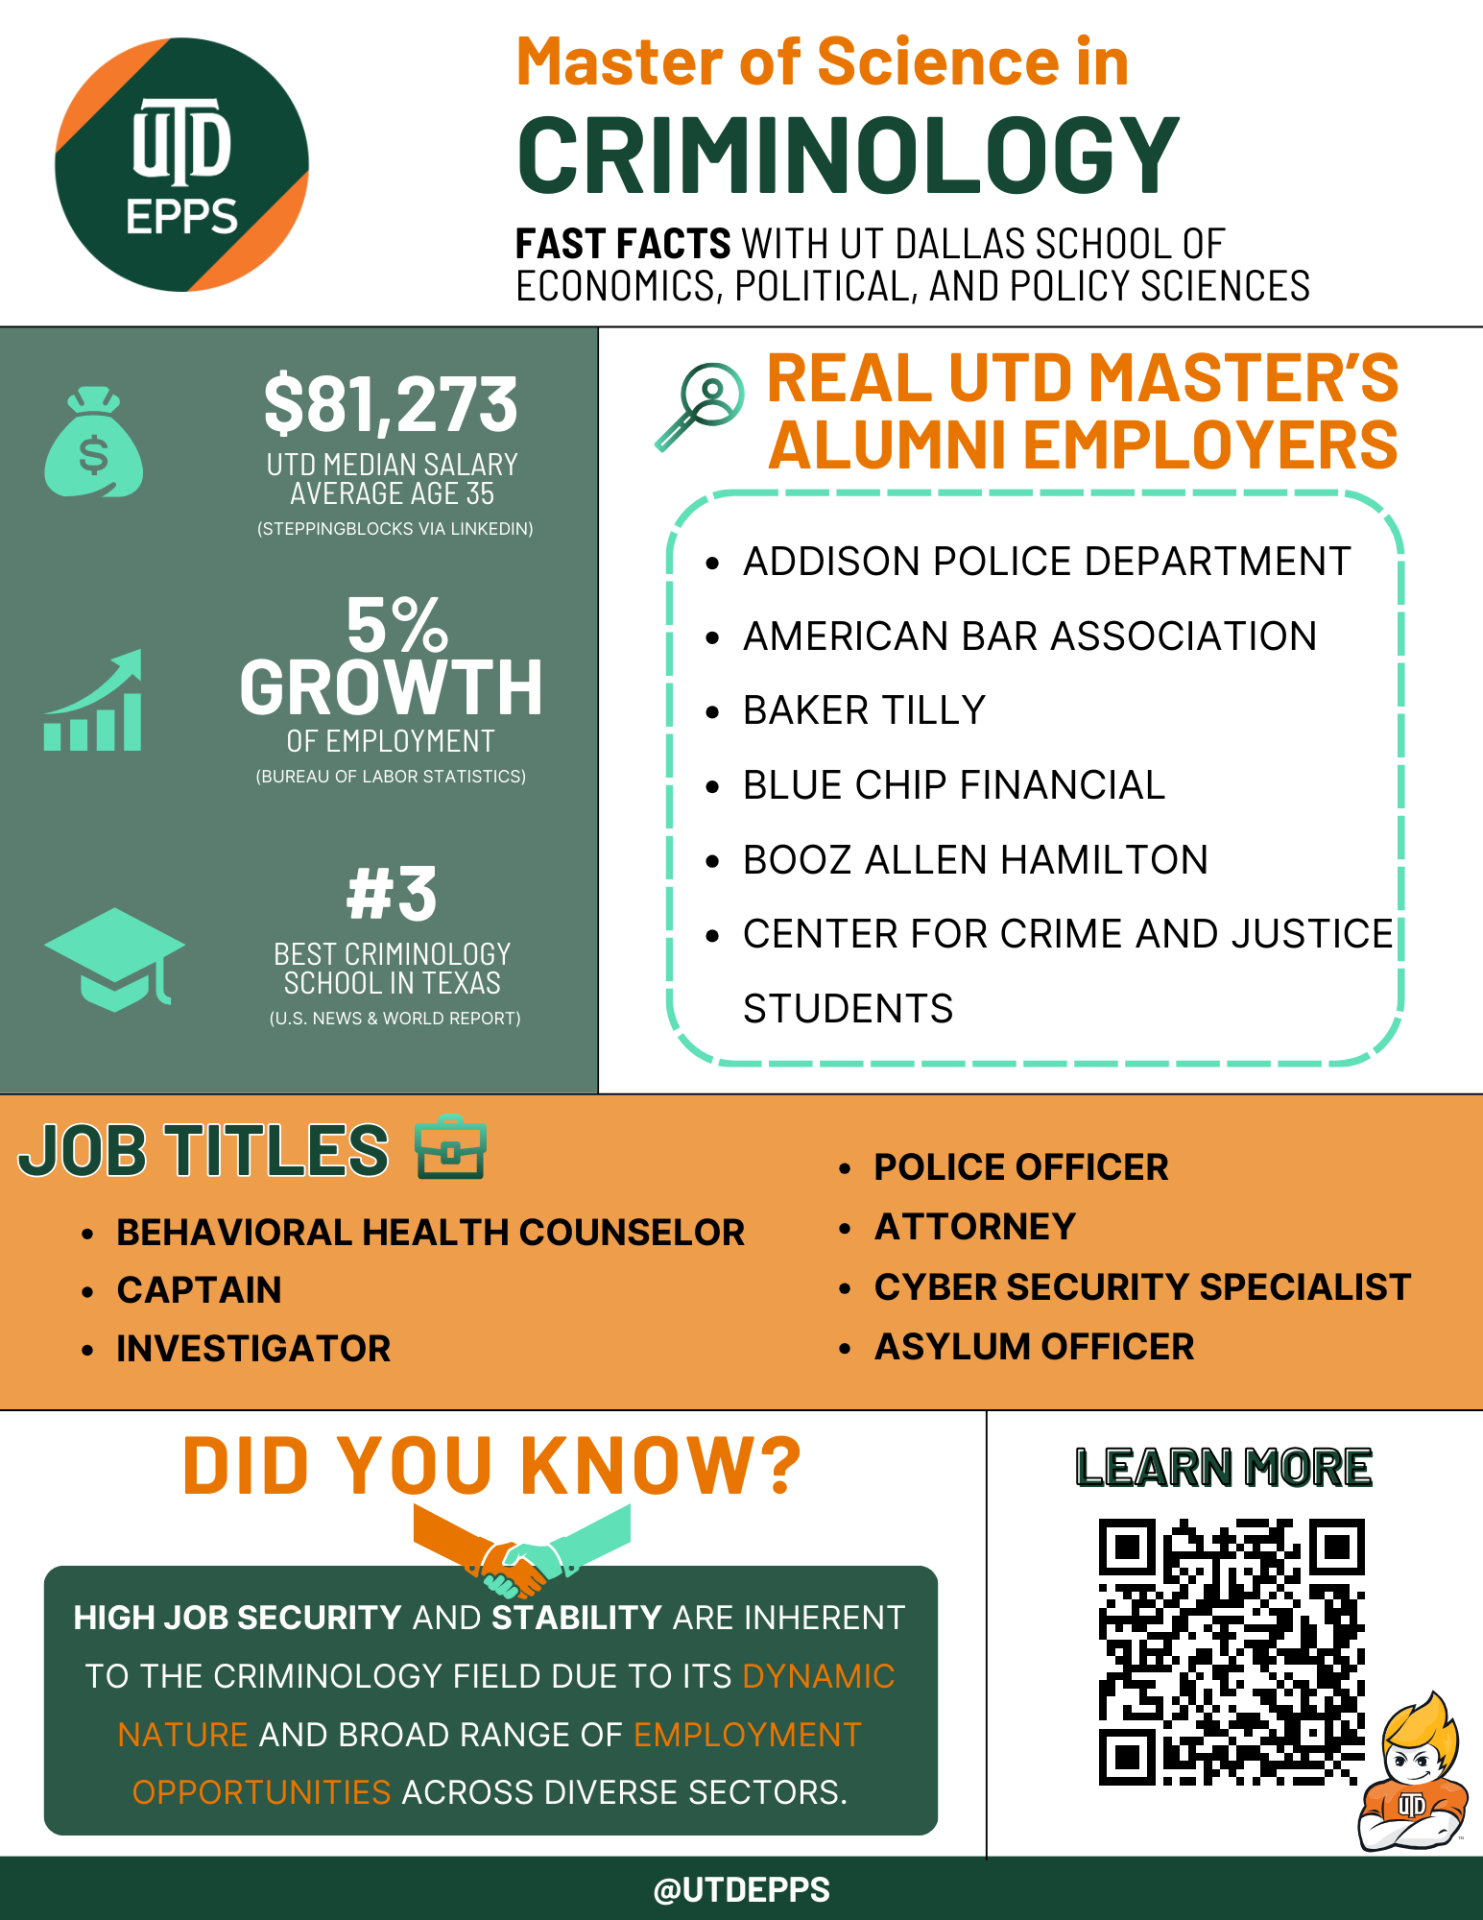 Master of Science in
criminology. Fast Facts with UT Dallas school of economics, political, and policy sciences
,273 is the UTD Median Salary
(Average age 35).
5% Growth OF EMPLOYMENT. Data is from STEPPINGBLOCKS VIA LINKED. 
(BUREAU OF LABOR STATISTICS)
#3 BEST CRIMINOLOGY SCHOOL IN TEXAS. Data by U.S. NEWS & WORLD REPORT. 

REAL UTD MASTER’S ALUMNI EMPLOYERS:
Addison Police Department 
American Bar Association
Baker Tilly
Blue Chip Financial
Booz Allen Hamilton
Center for Crime and Justice Students

Job Titles include:
Behavioral Health Counselor
Captain
Investigator
Police Officer
Attorney 
Cyber Security Specialist
Asylum Officer

LEARN MORE by scanning the QR code. 
DID YOU KNOW? High job security and stability are inherent to the criminology field due to its dynamic nature and broad range of employment opportunities across diverse sectors.

@UTDEPPS 